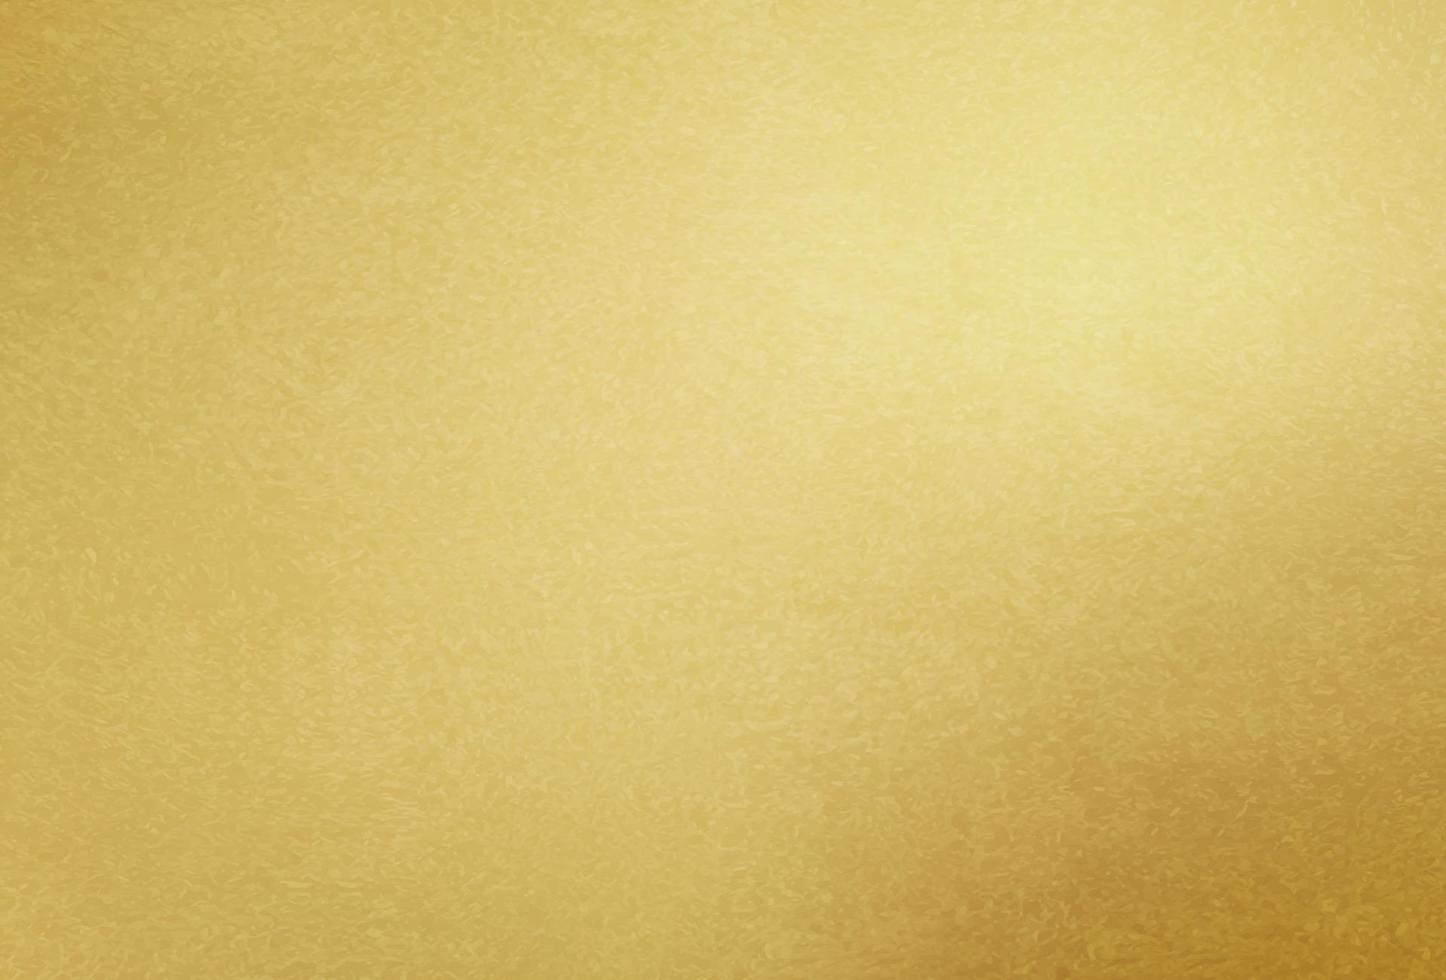 Gold textured background vector